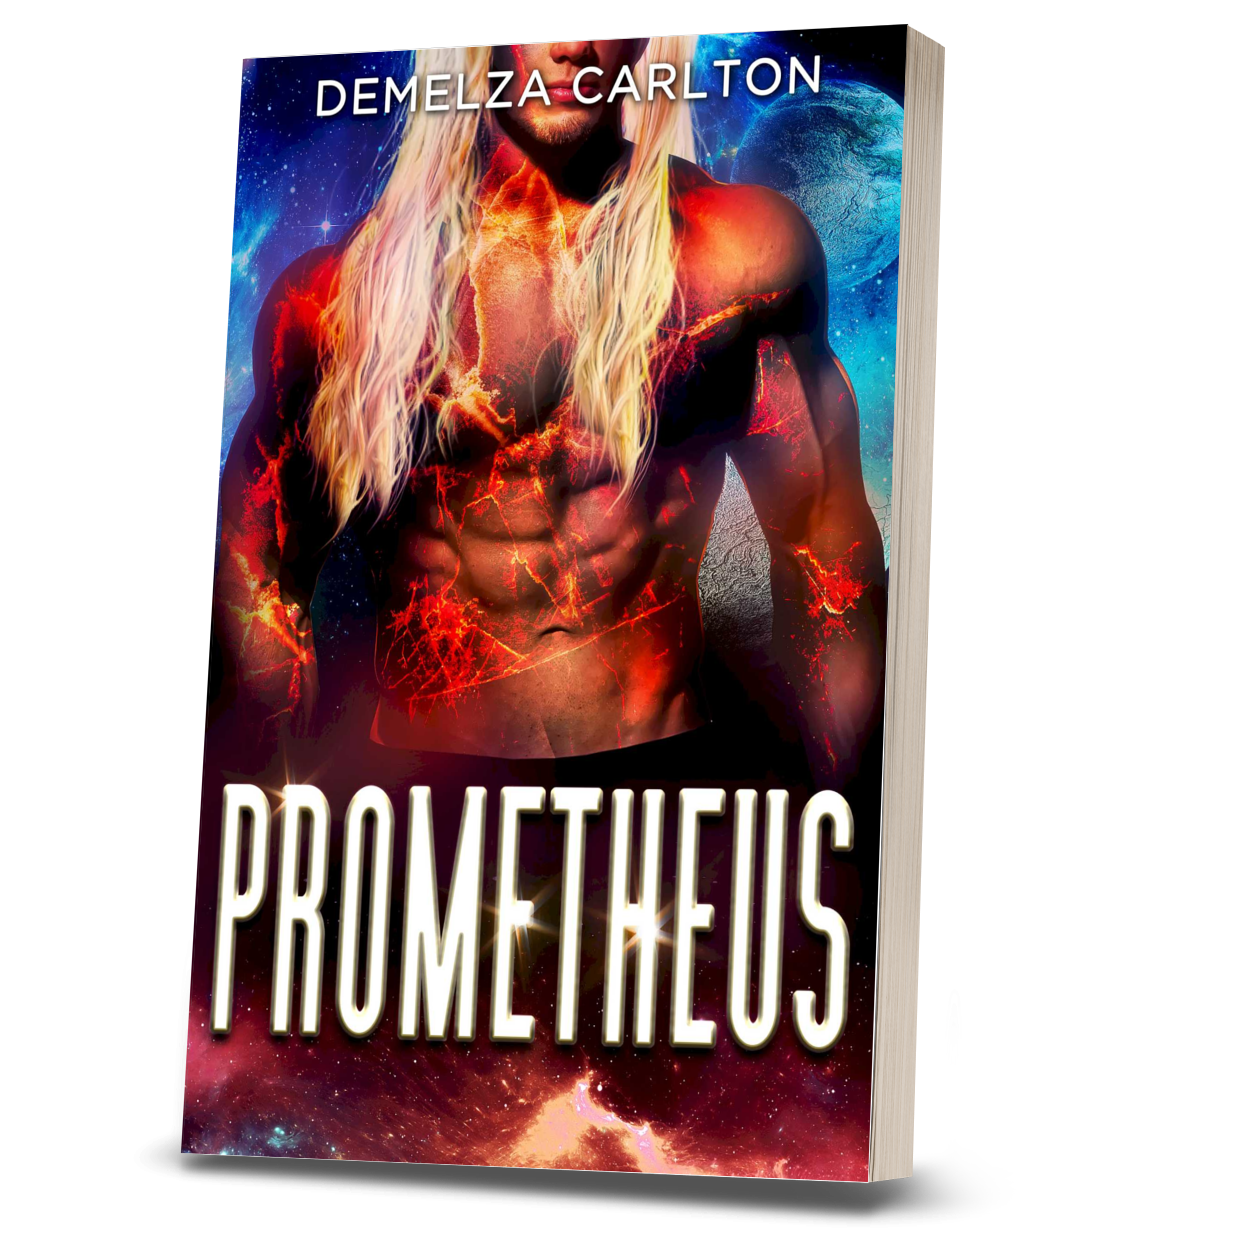 Prometheus: An Alien Scifi Romance (Book 6 in the Colony: Holiday series) PAPERBACK